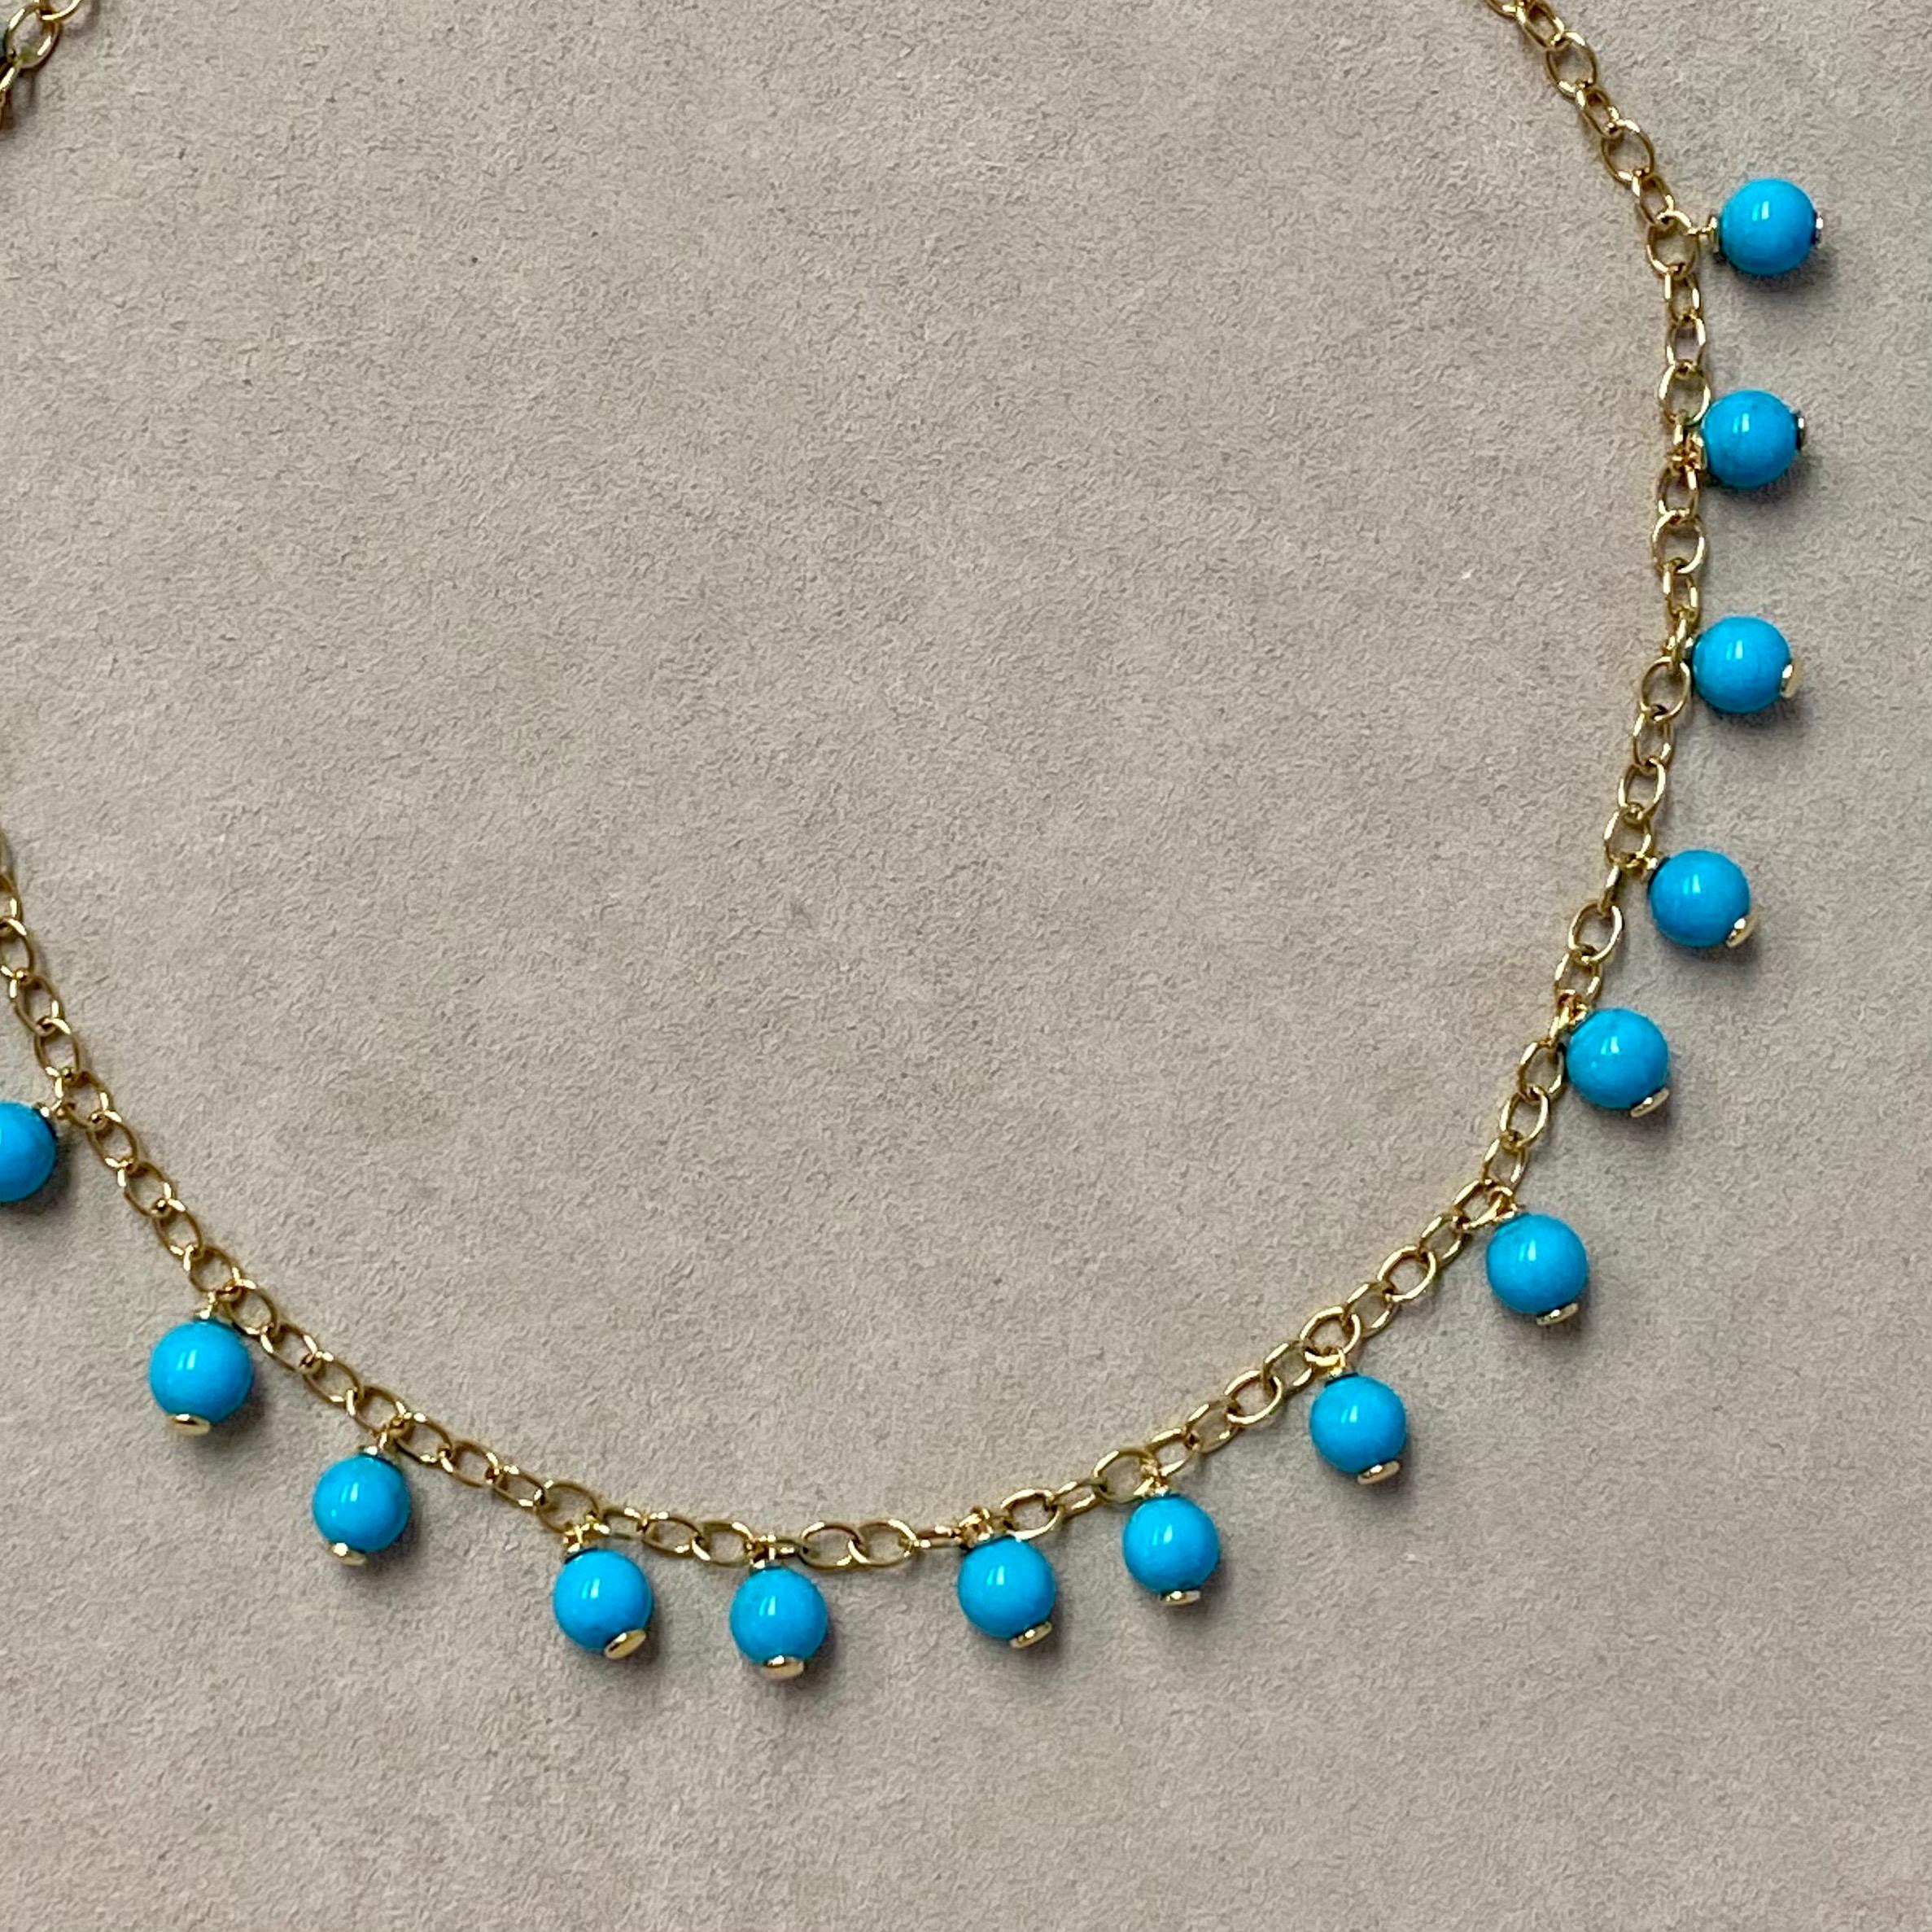 Created in 18 karat yellow gold
18 inch length
Sleeping Beauty Turquoise beads 57 carats approx.
18kyg lobster clasp
Limited edition

Exquisitely crafted in 18 karat yellow gold, this limited edition necklace boasts an 18-inch length and 57 carats